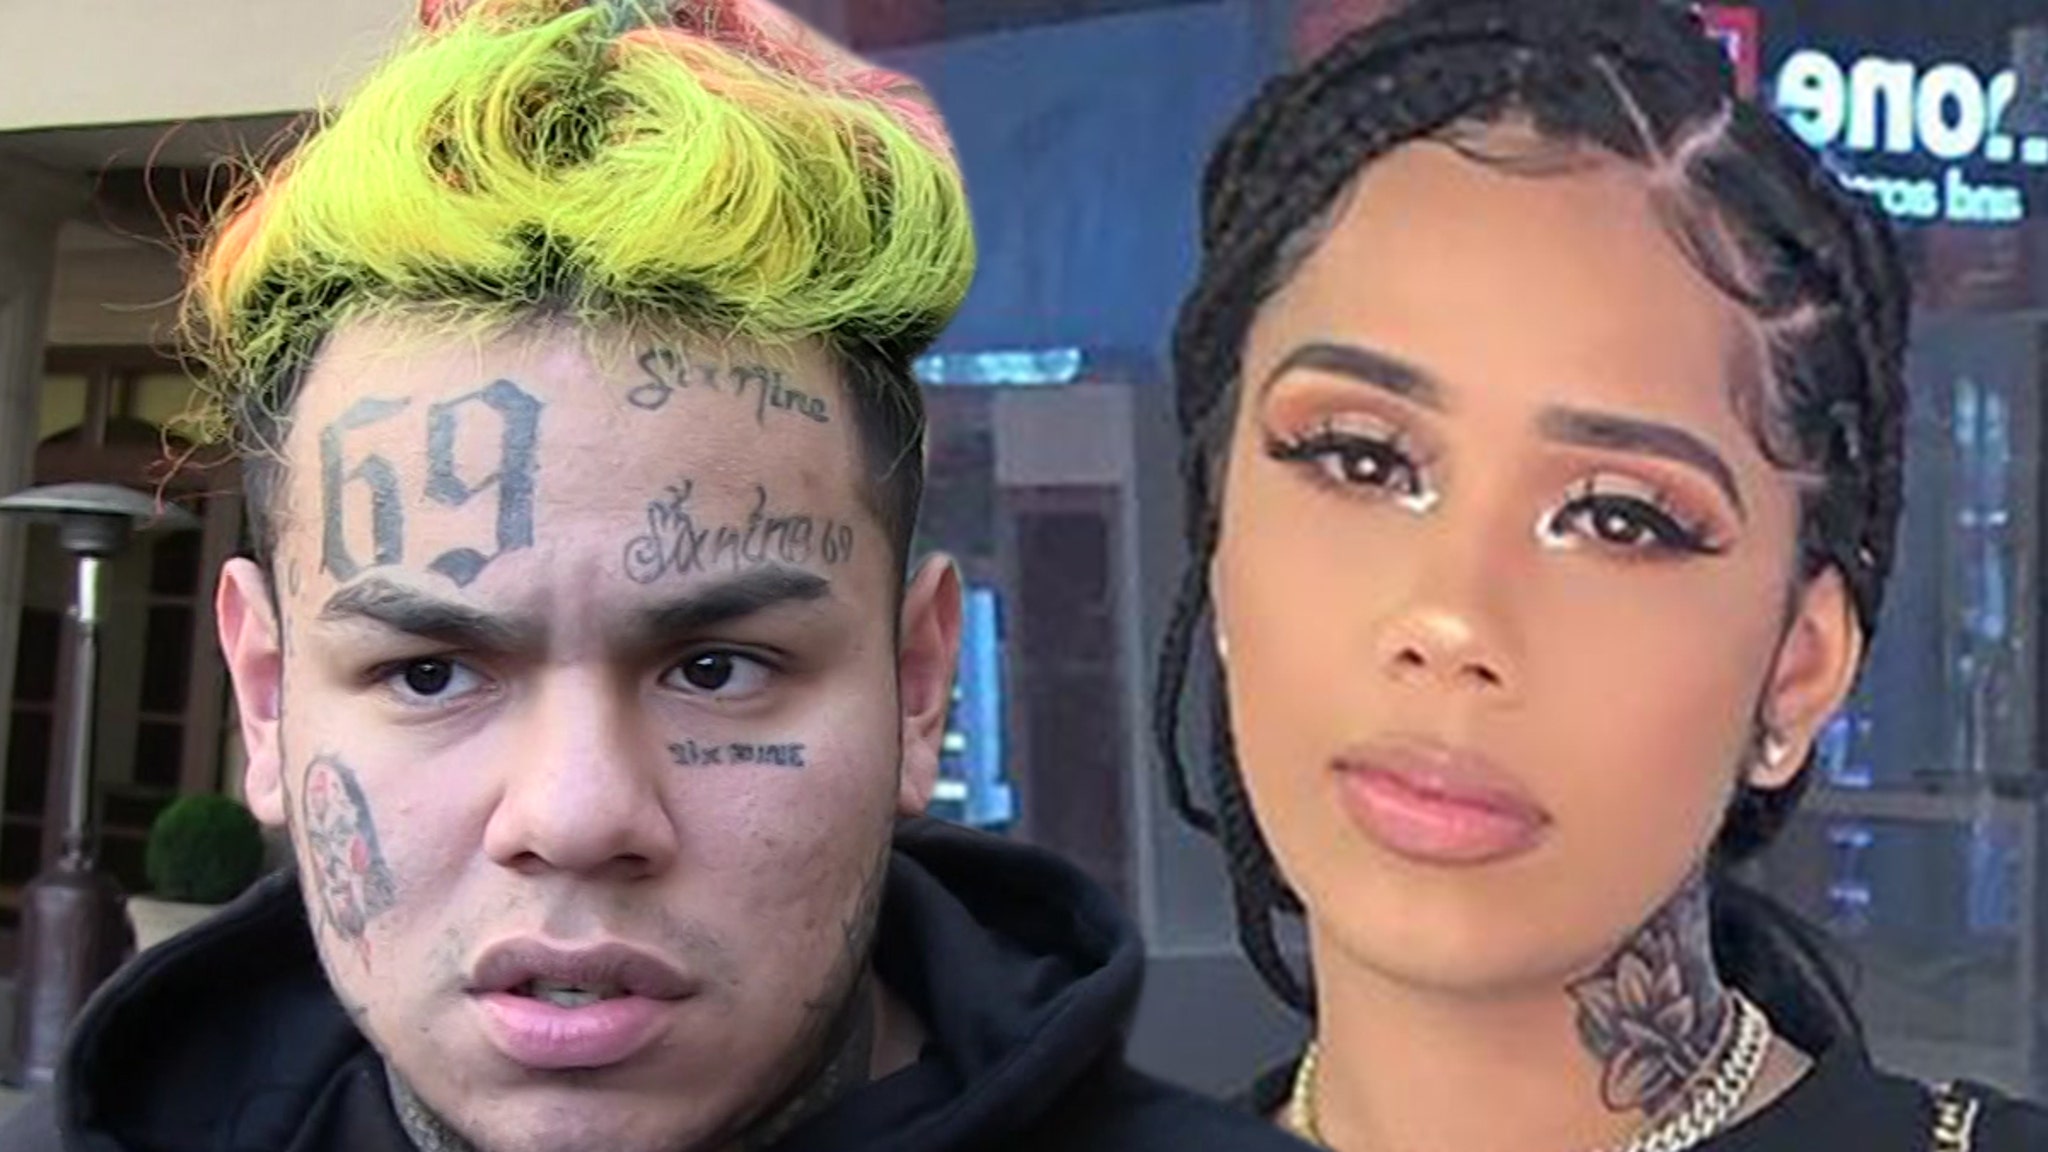 6ix9ine’s baby mum is afraid his meat will endanger their daughter